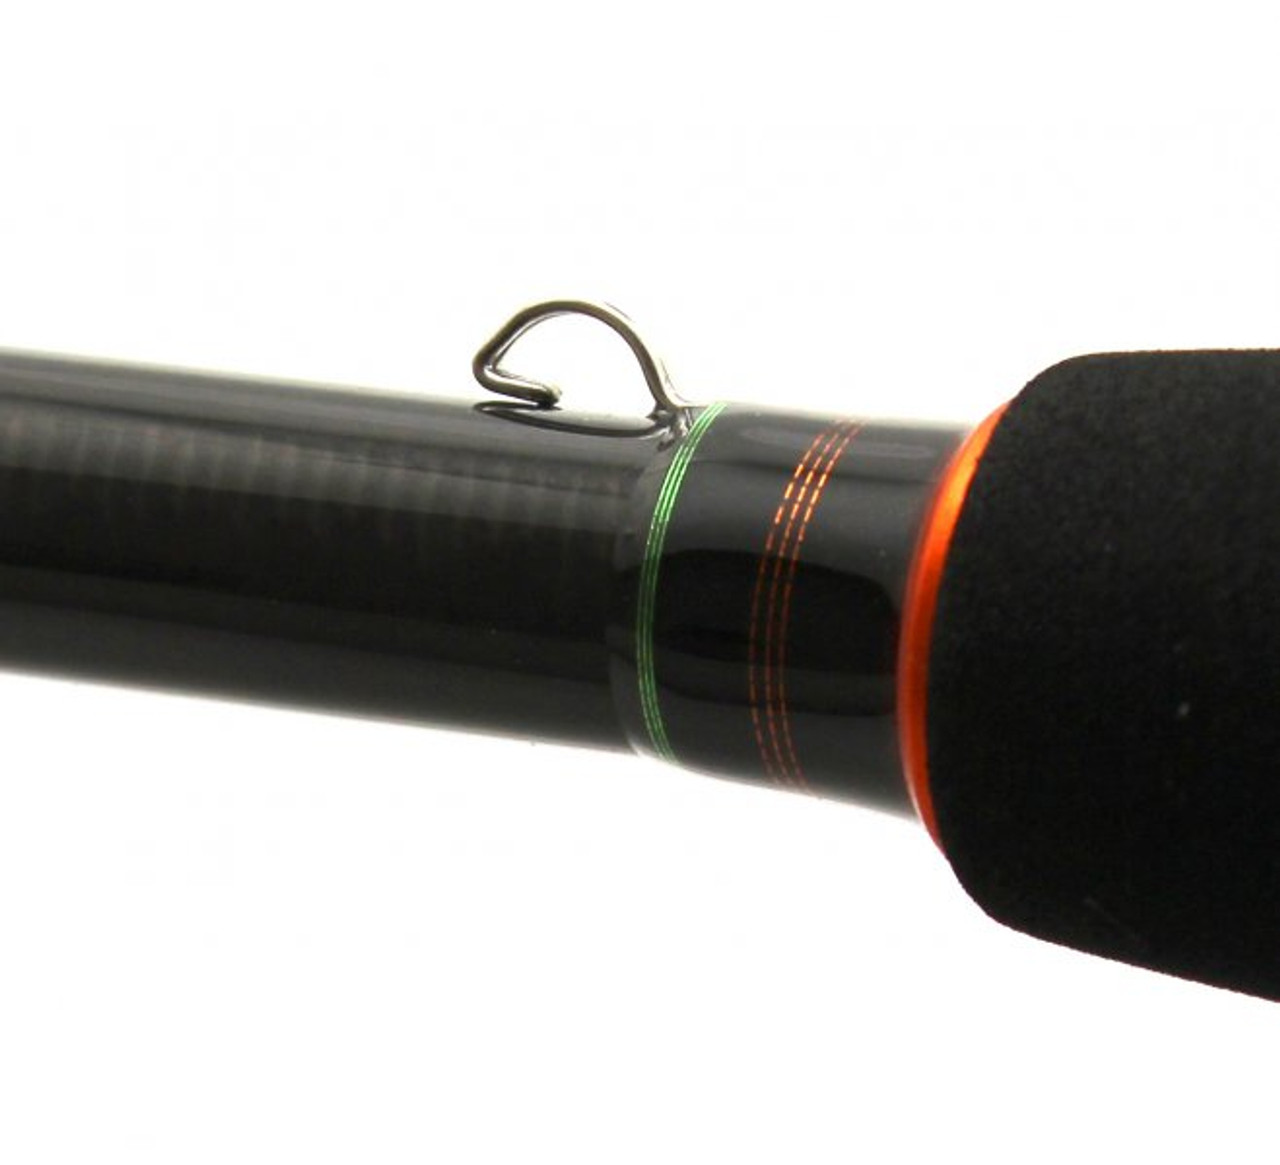 Dobyns Rods Colt Series Spinning Rods